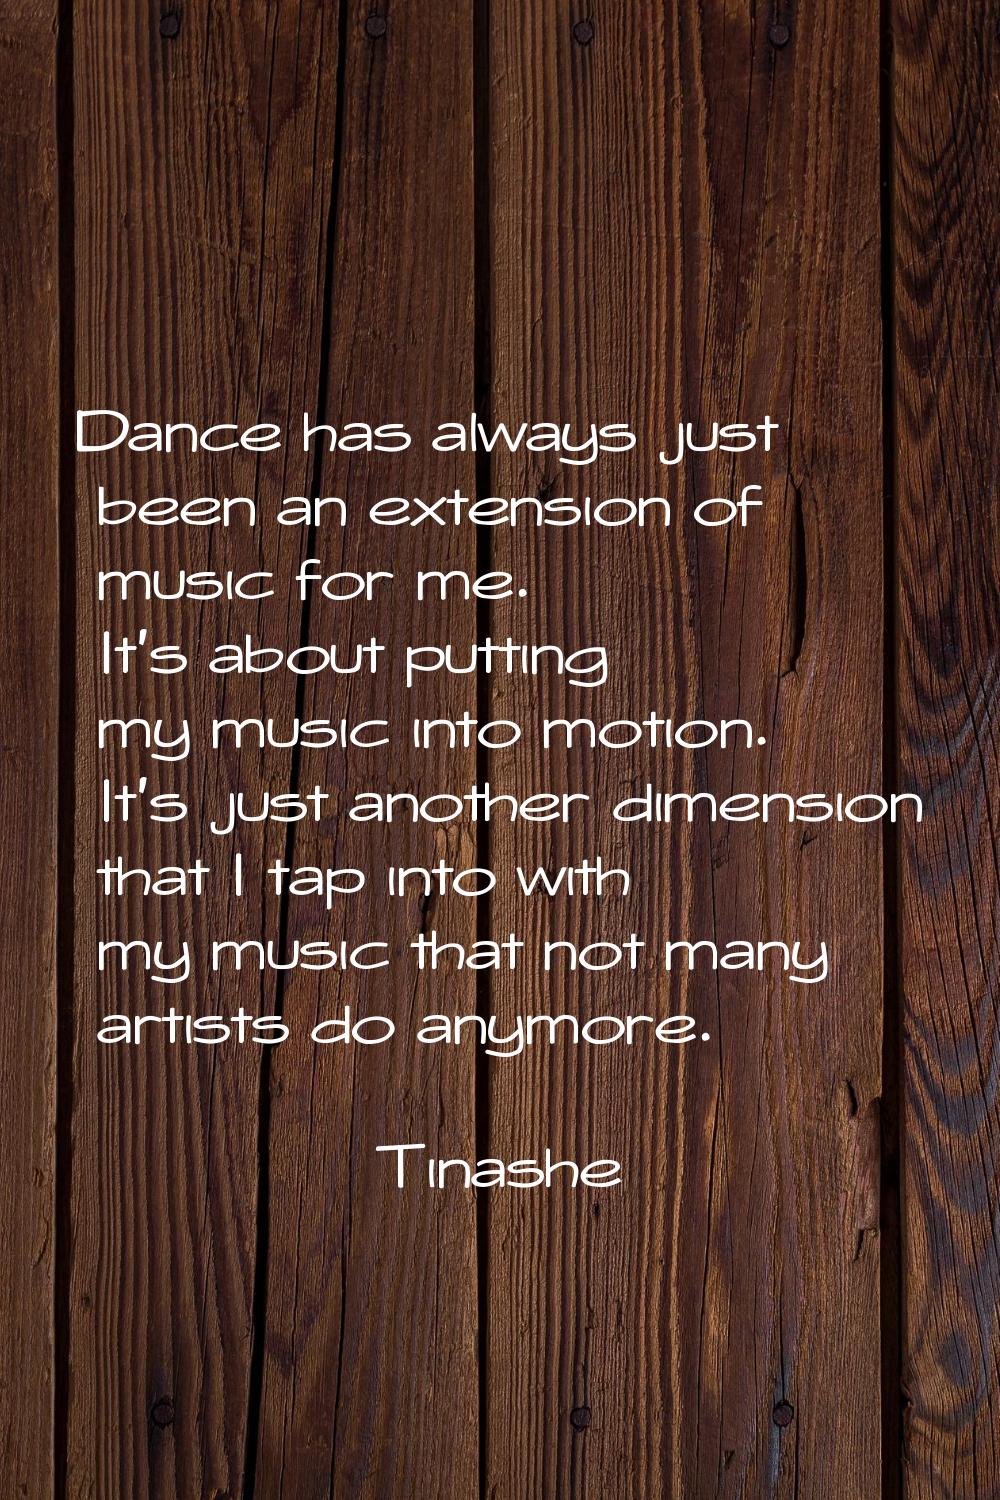 Dance has always just been an extension of music for me. It's about putting my music into motion. I